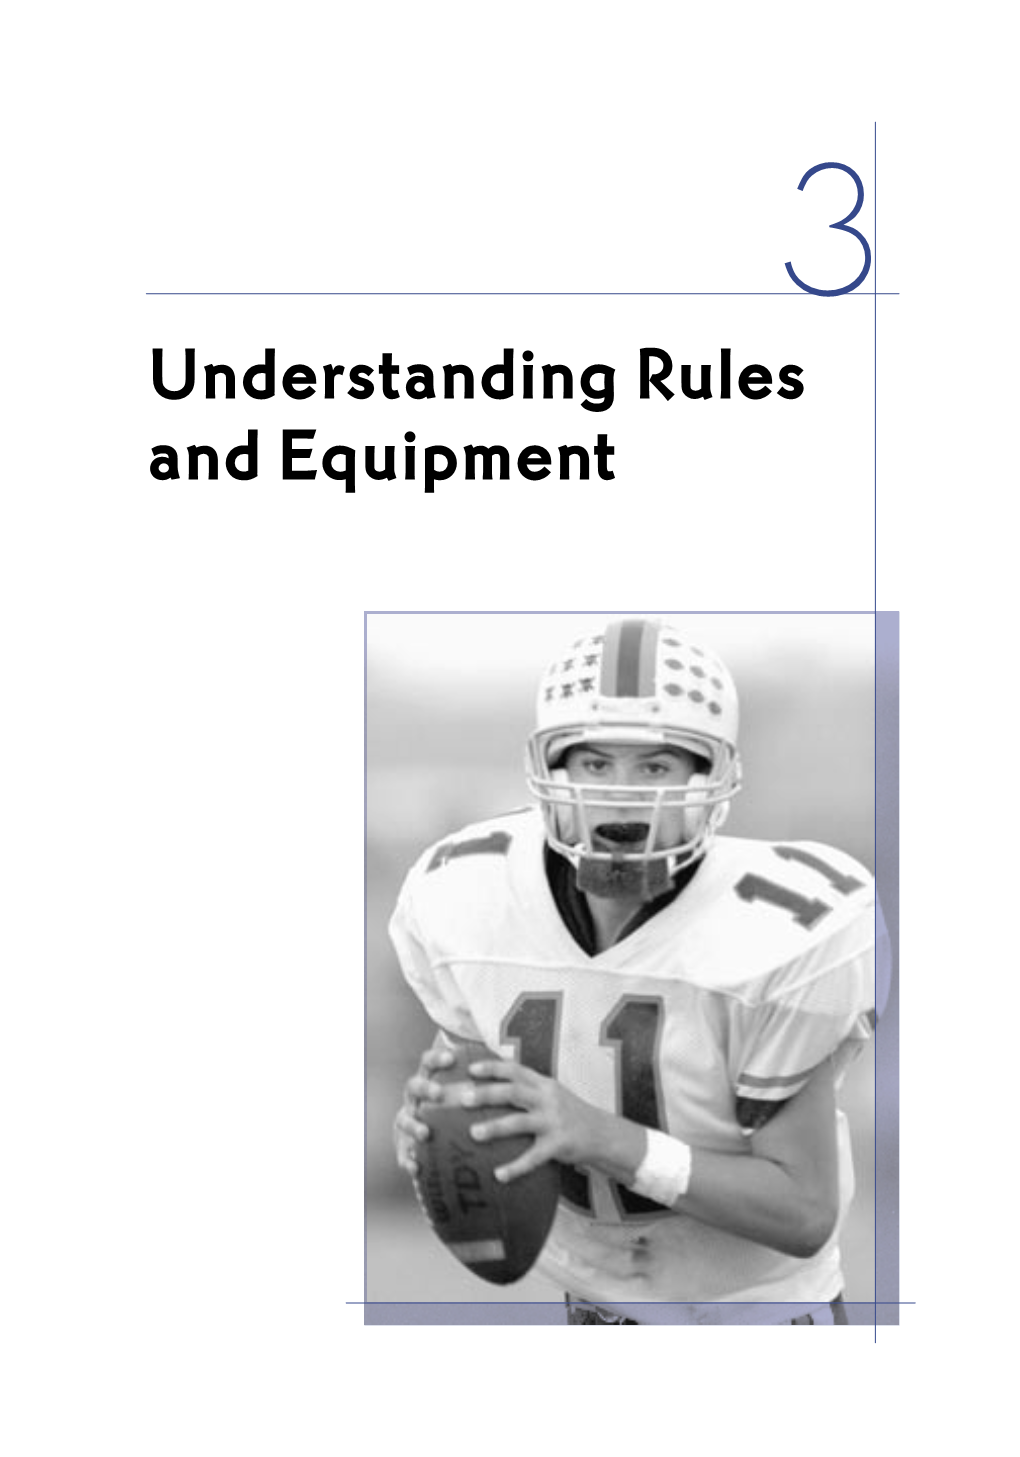 Football Understanding Rules and Equipment 21